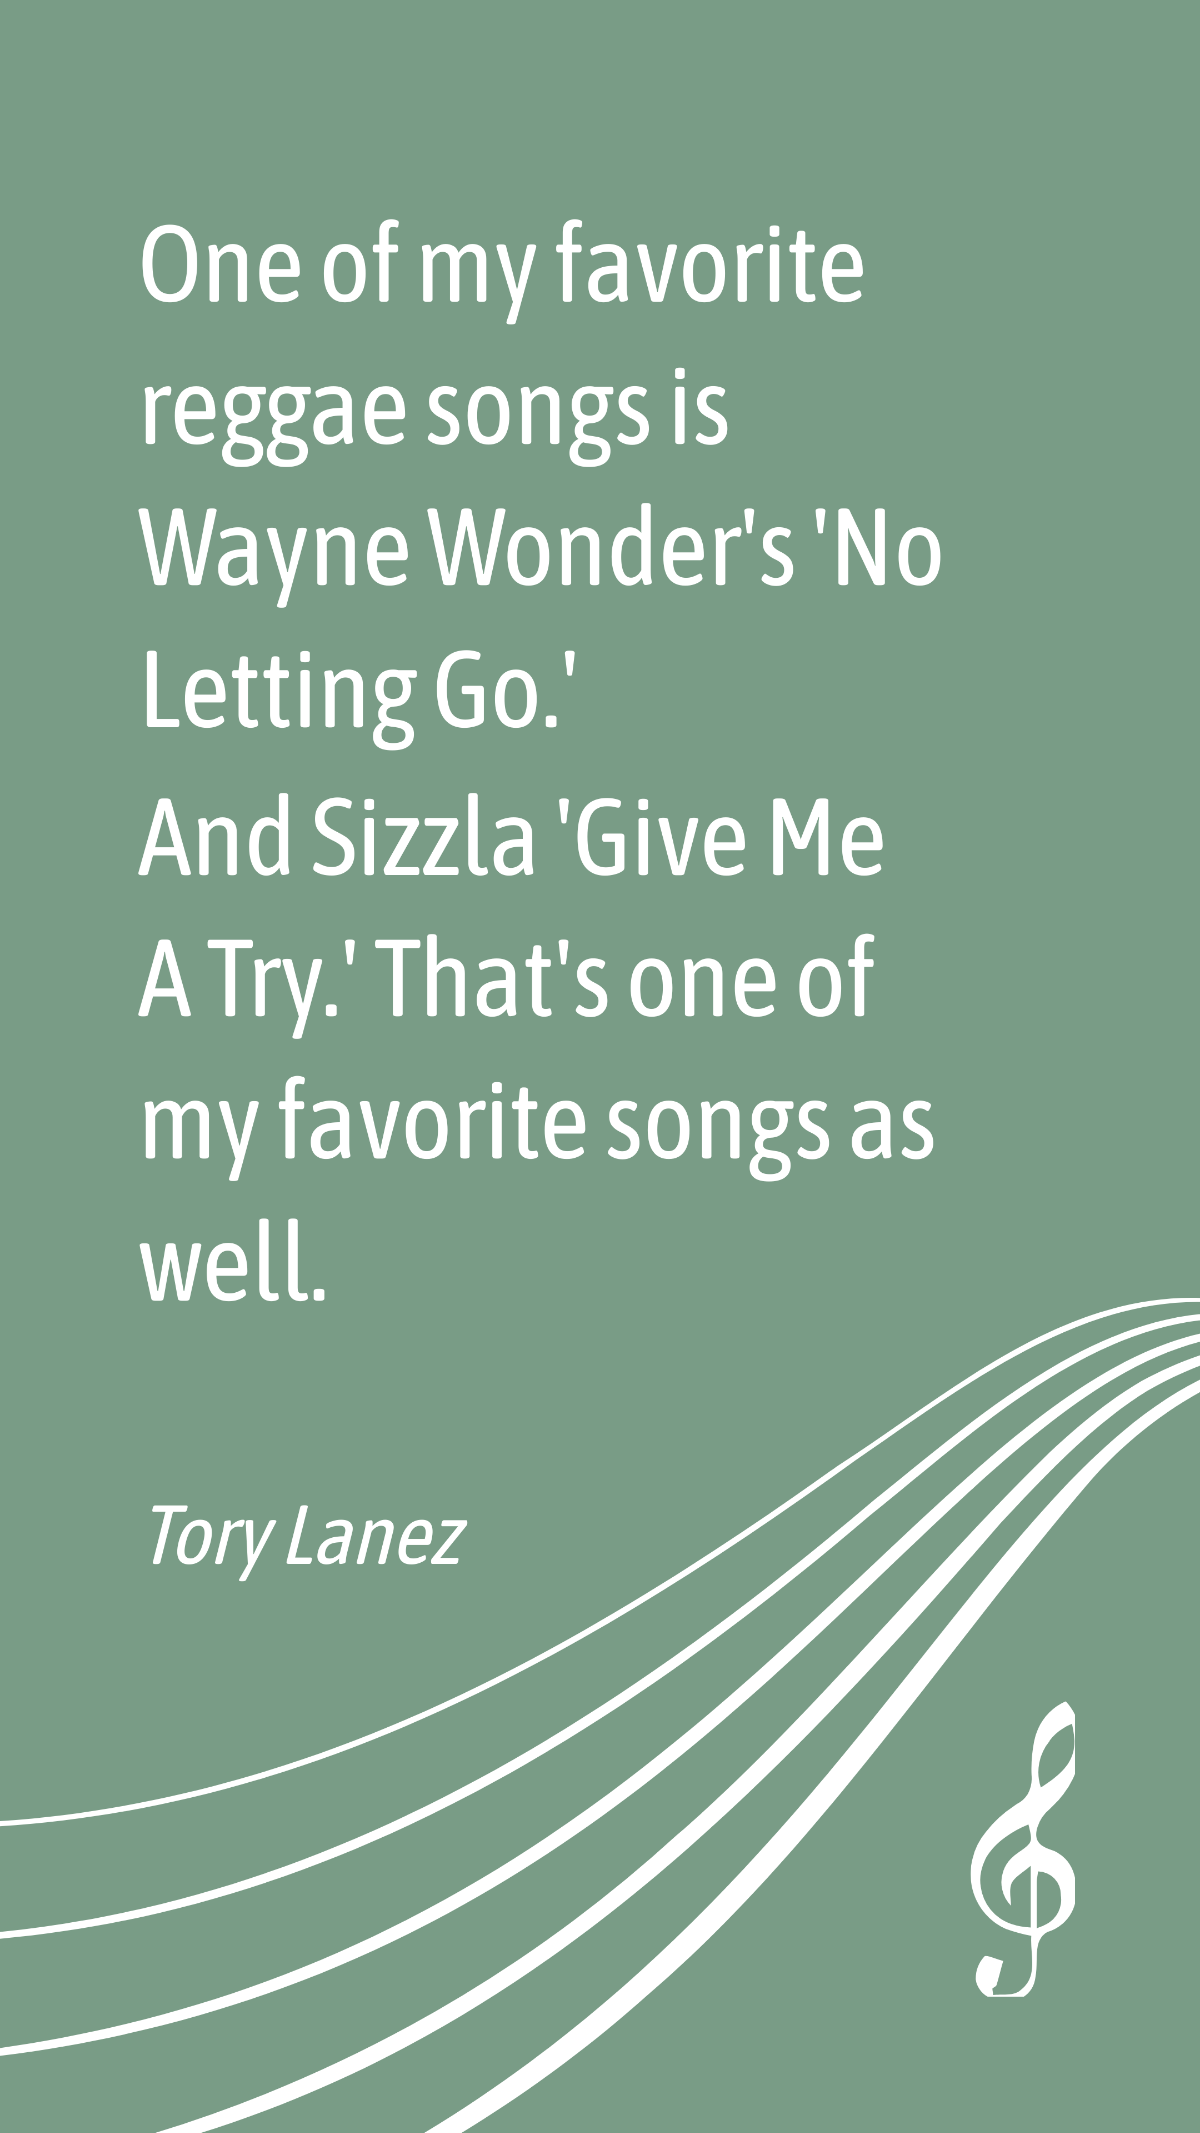 Free Tory Lanez - One of my favorite reggae songs is Wayne Wonder's 'No Letting Go.' And Sizzla 'Give Me A Try.' That's one of my favorite songs as well. Template